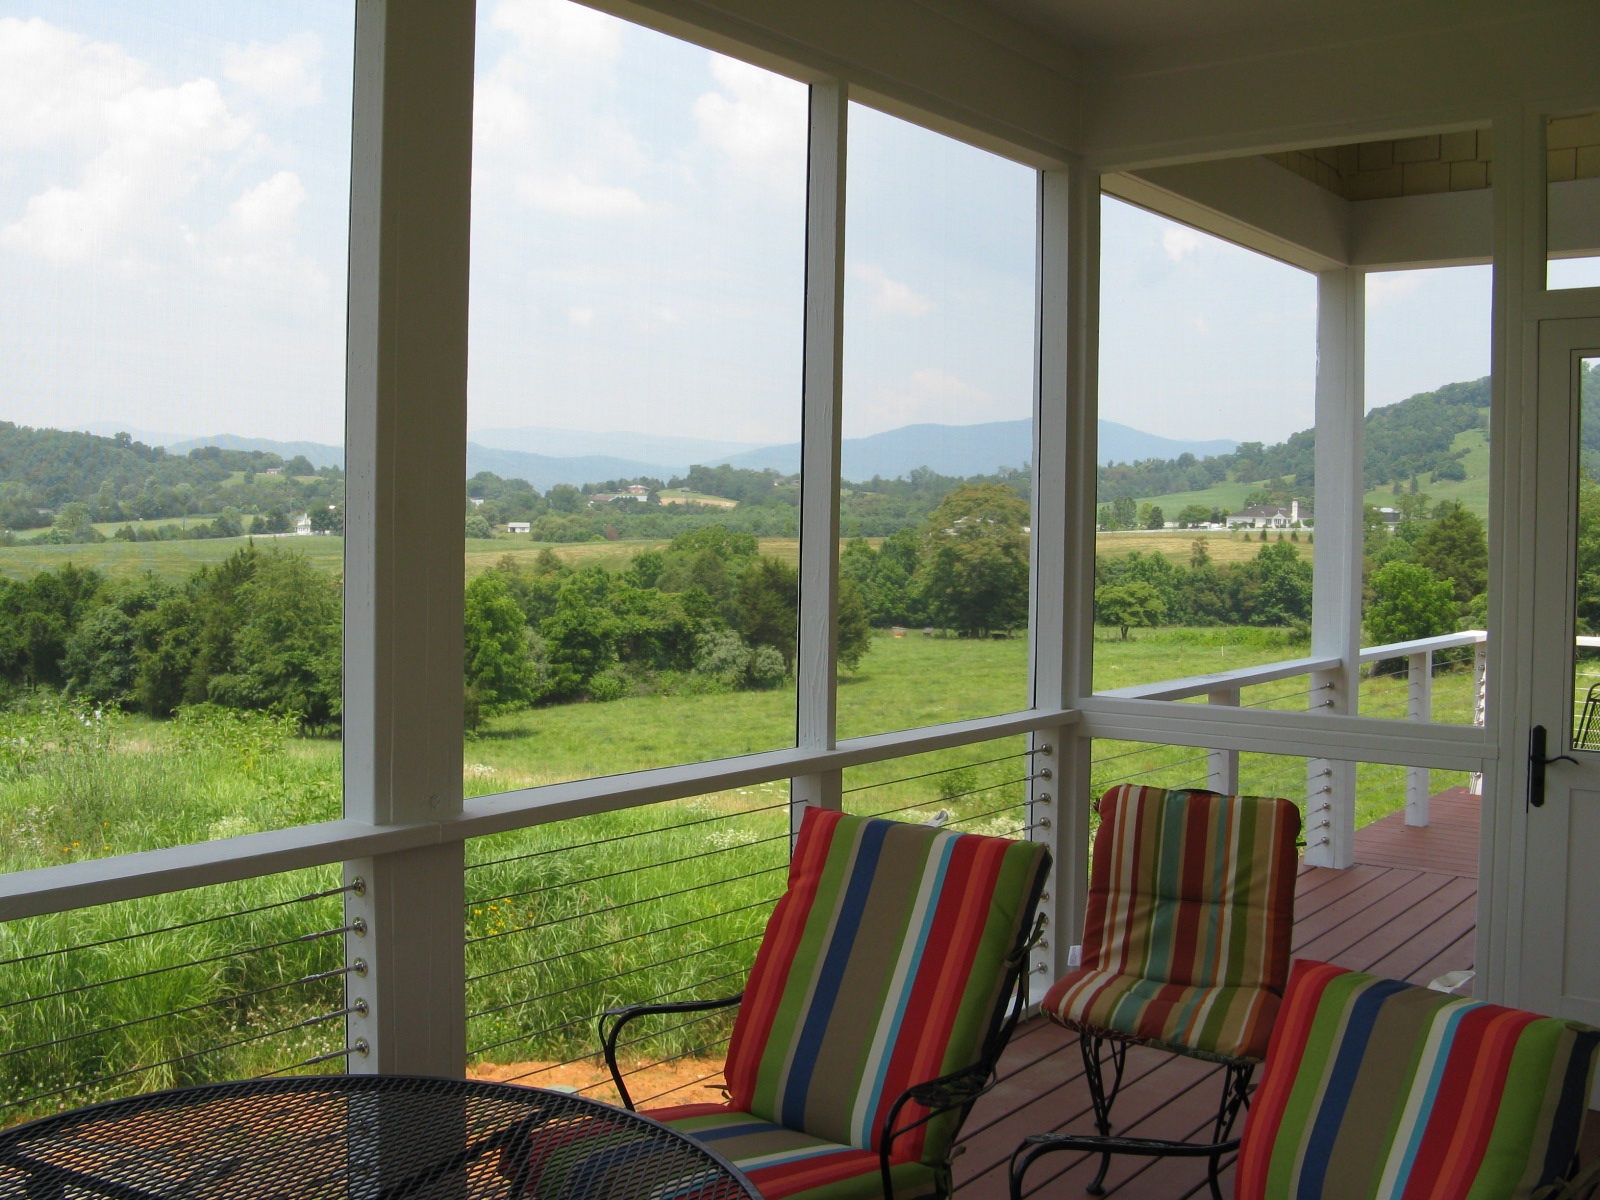  Screened Porch with Mountain Views 